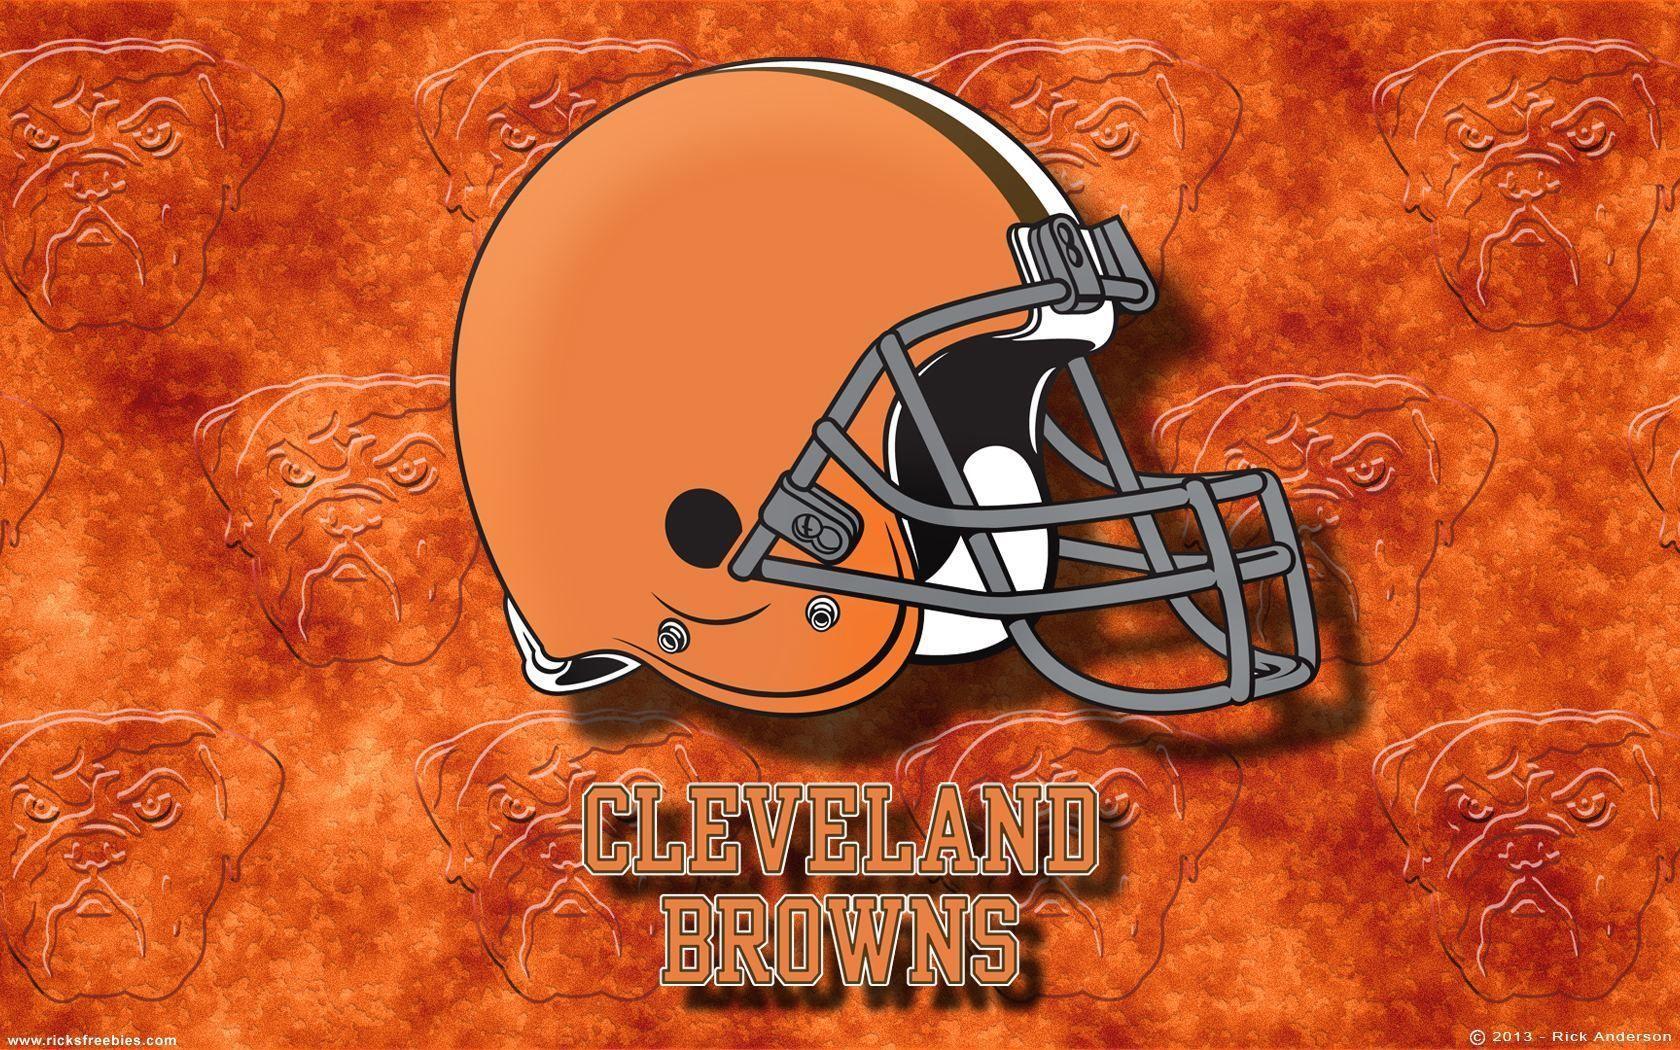 Cleveland Browns wallpapers hd free download